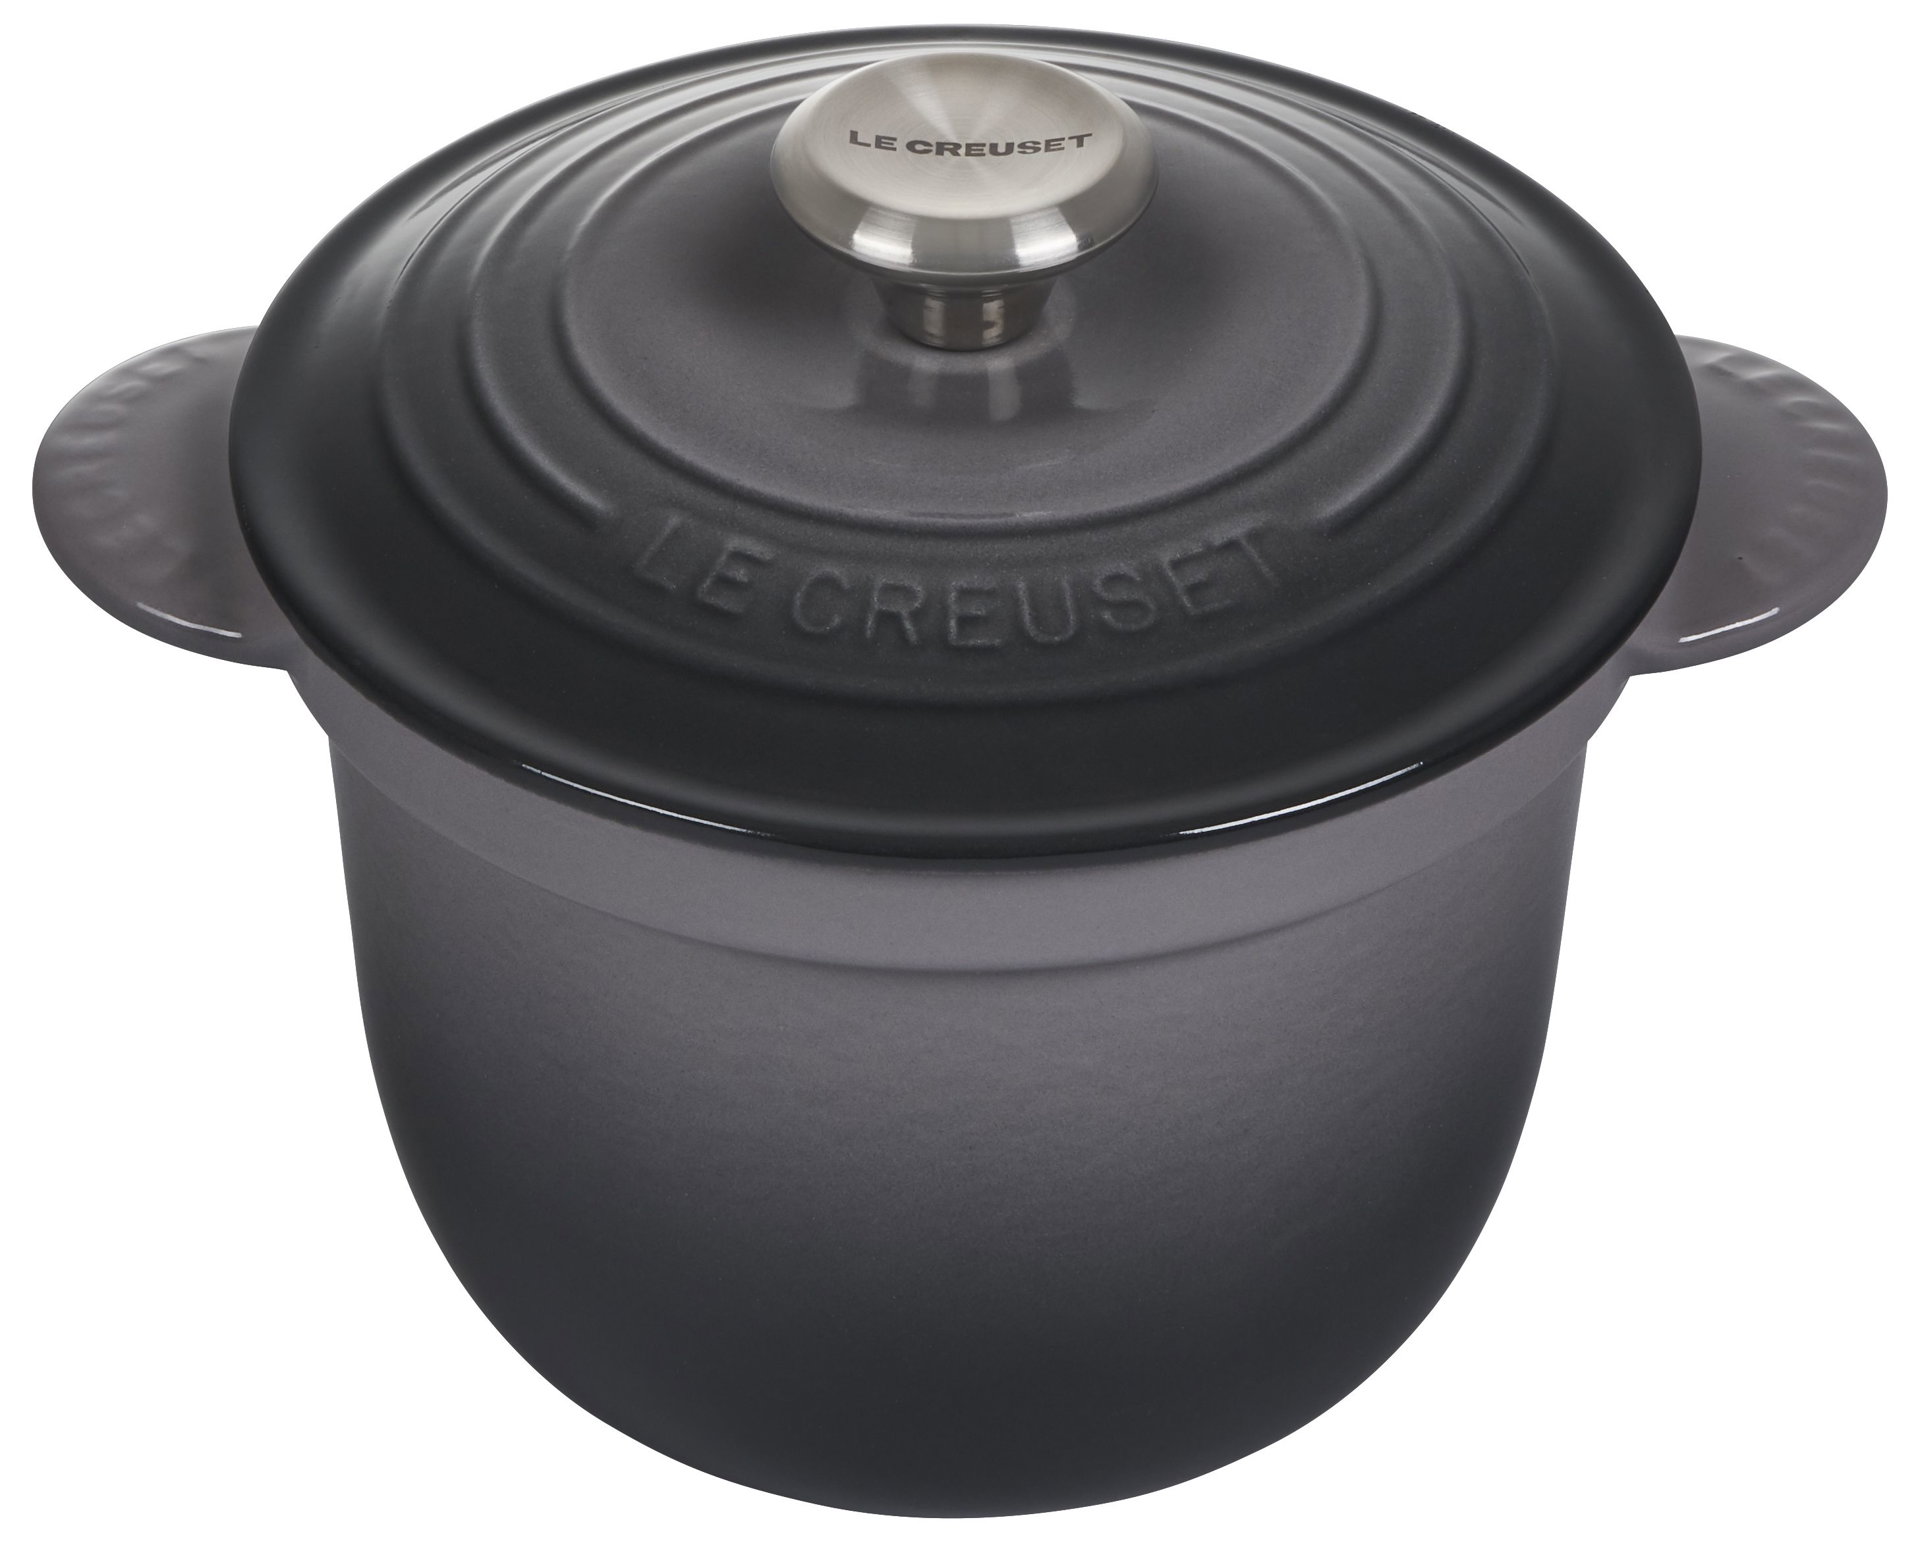 Le Creuset Rice Cooker, With a special design that applies uniform heat  and prevents foamy boil-over, the new @LeCreuset cast iron pot cooks  perfect rice and grains every time.